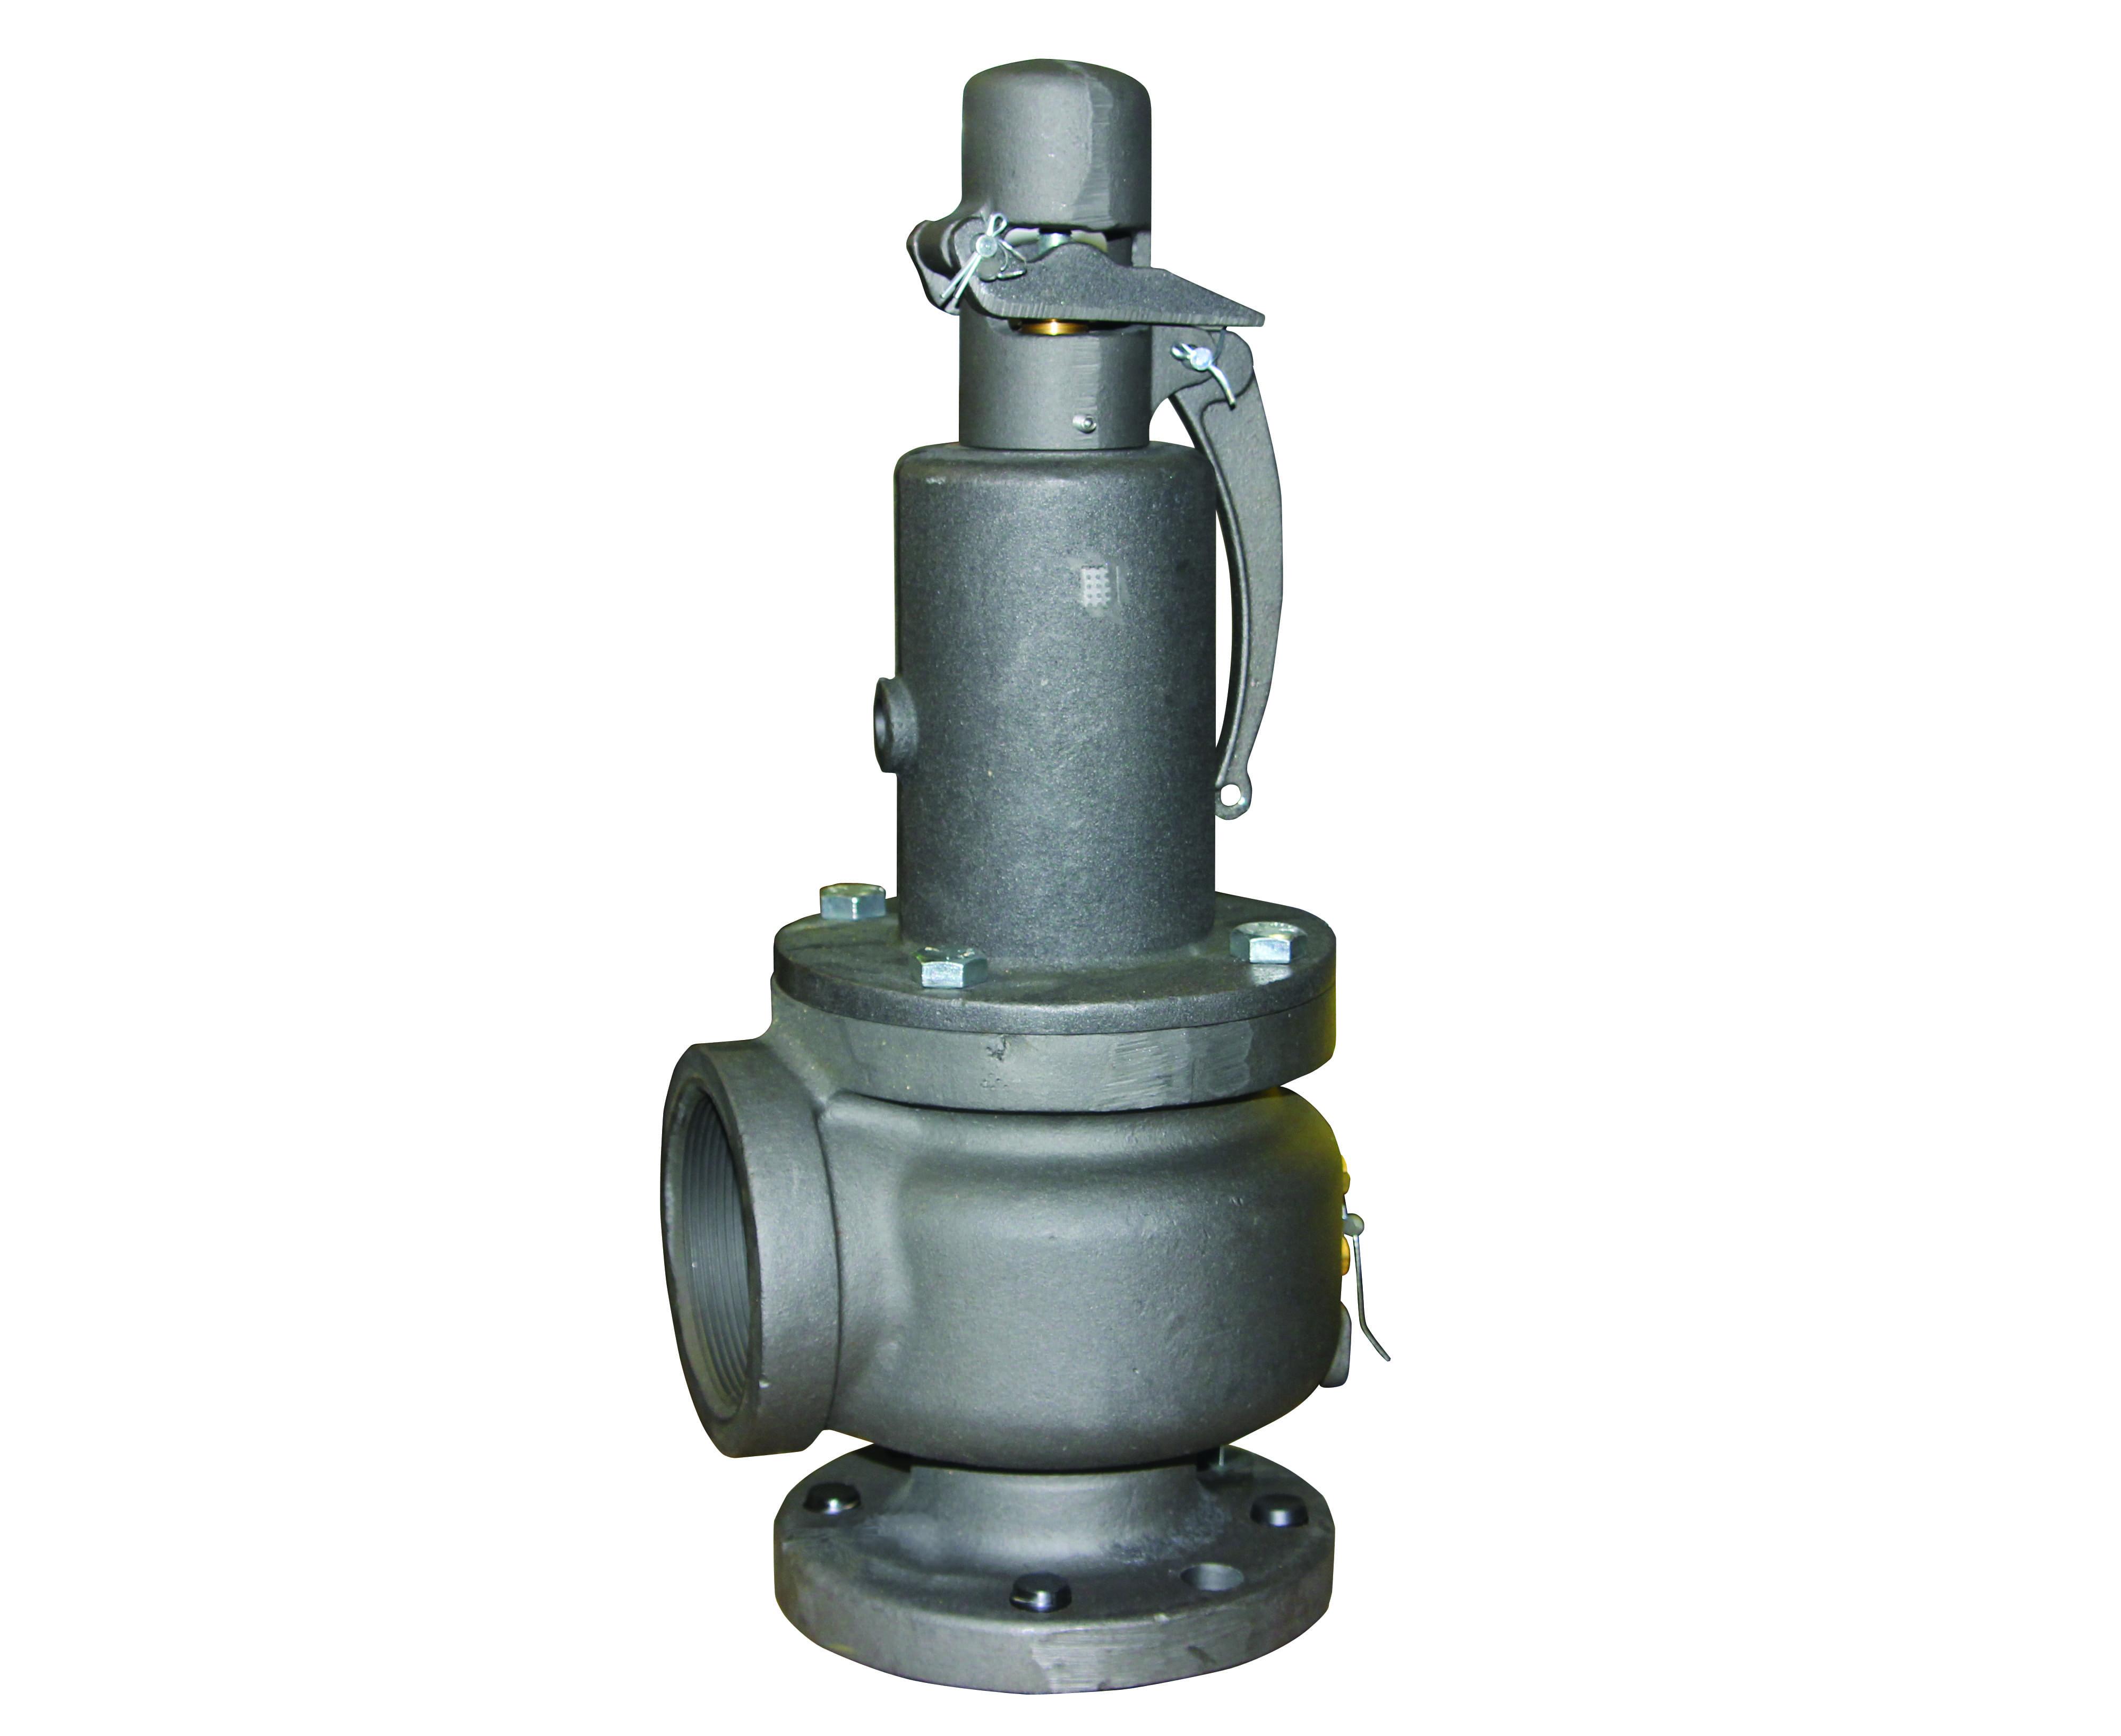 Preview image for Apollo ASME Section VIII Steam Cast Iron Safety Relief Valve, 6" x 8" (2 x Flange)